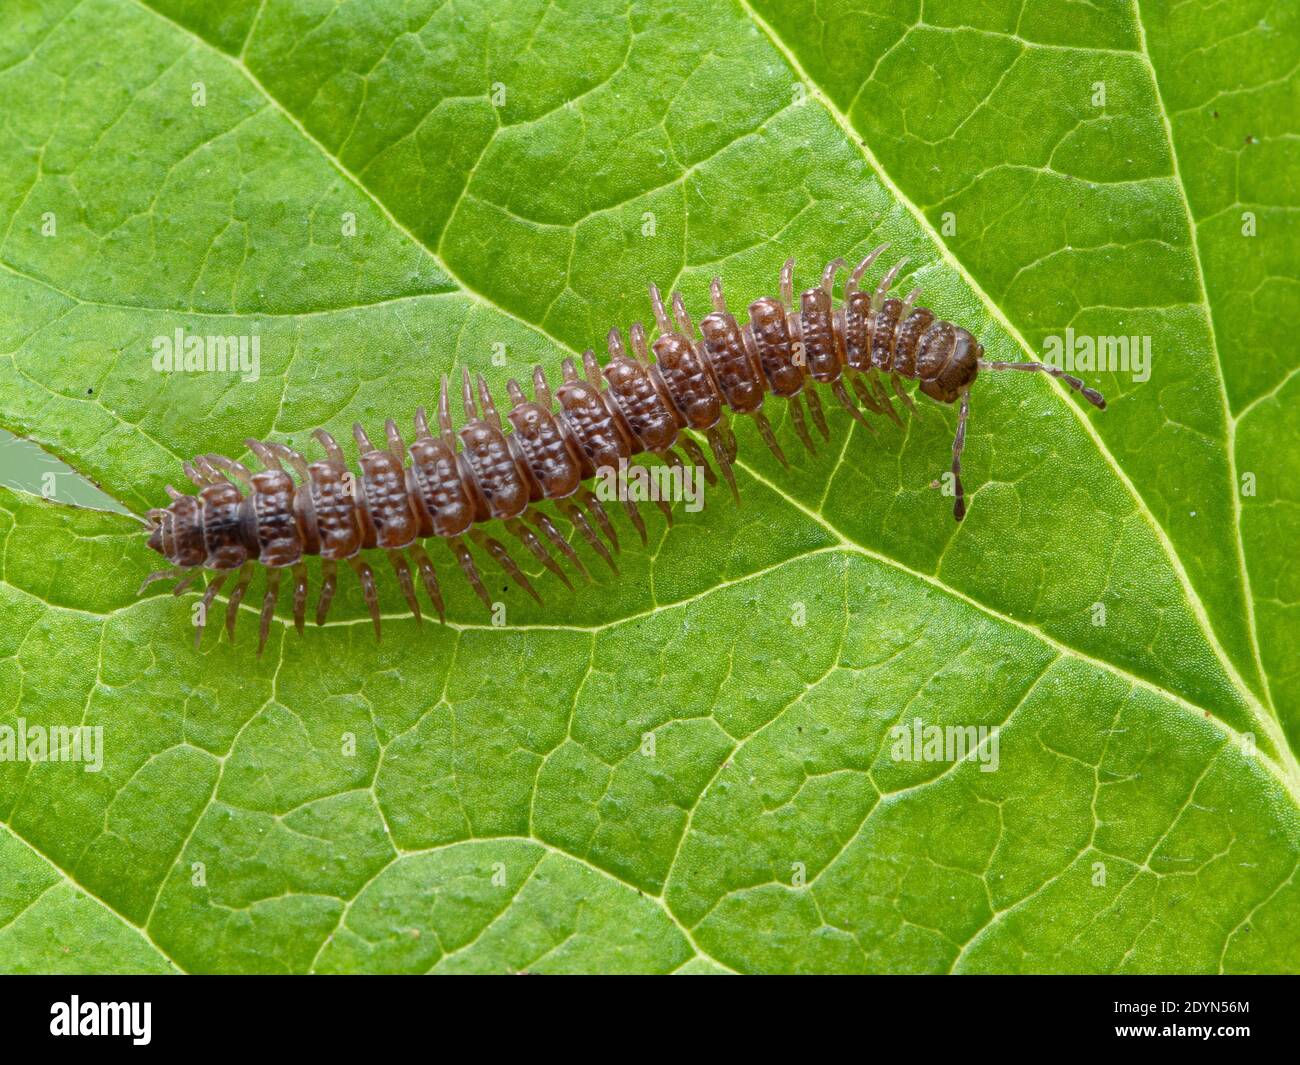 flat-backed millipede (Polydesmus) seen from above, crawling on a green leaf in Delta, British Columbia, Canada Stock Photo